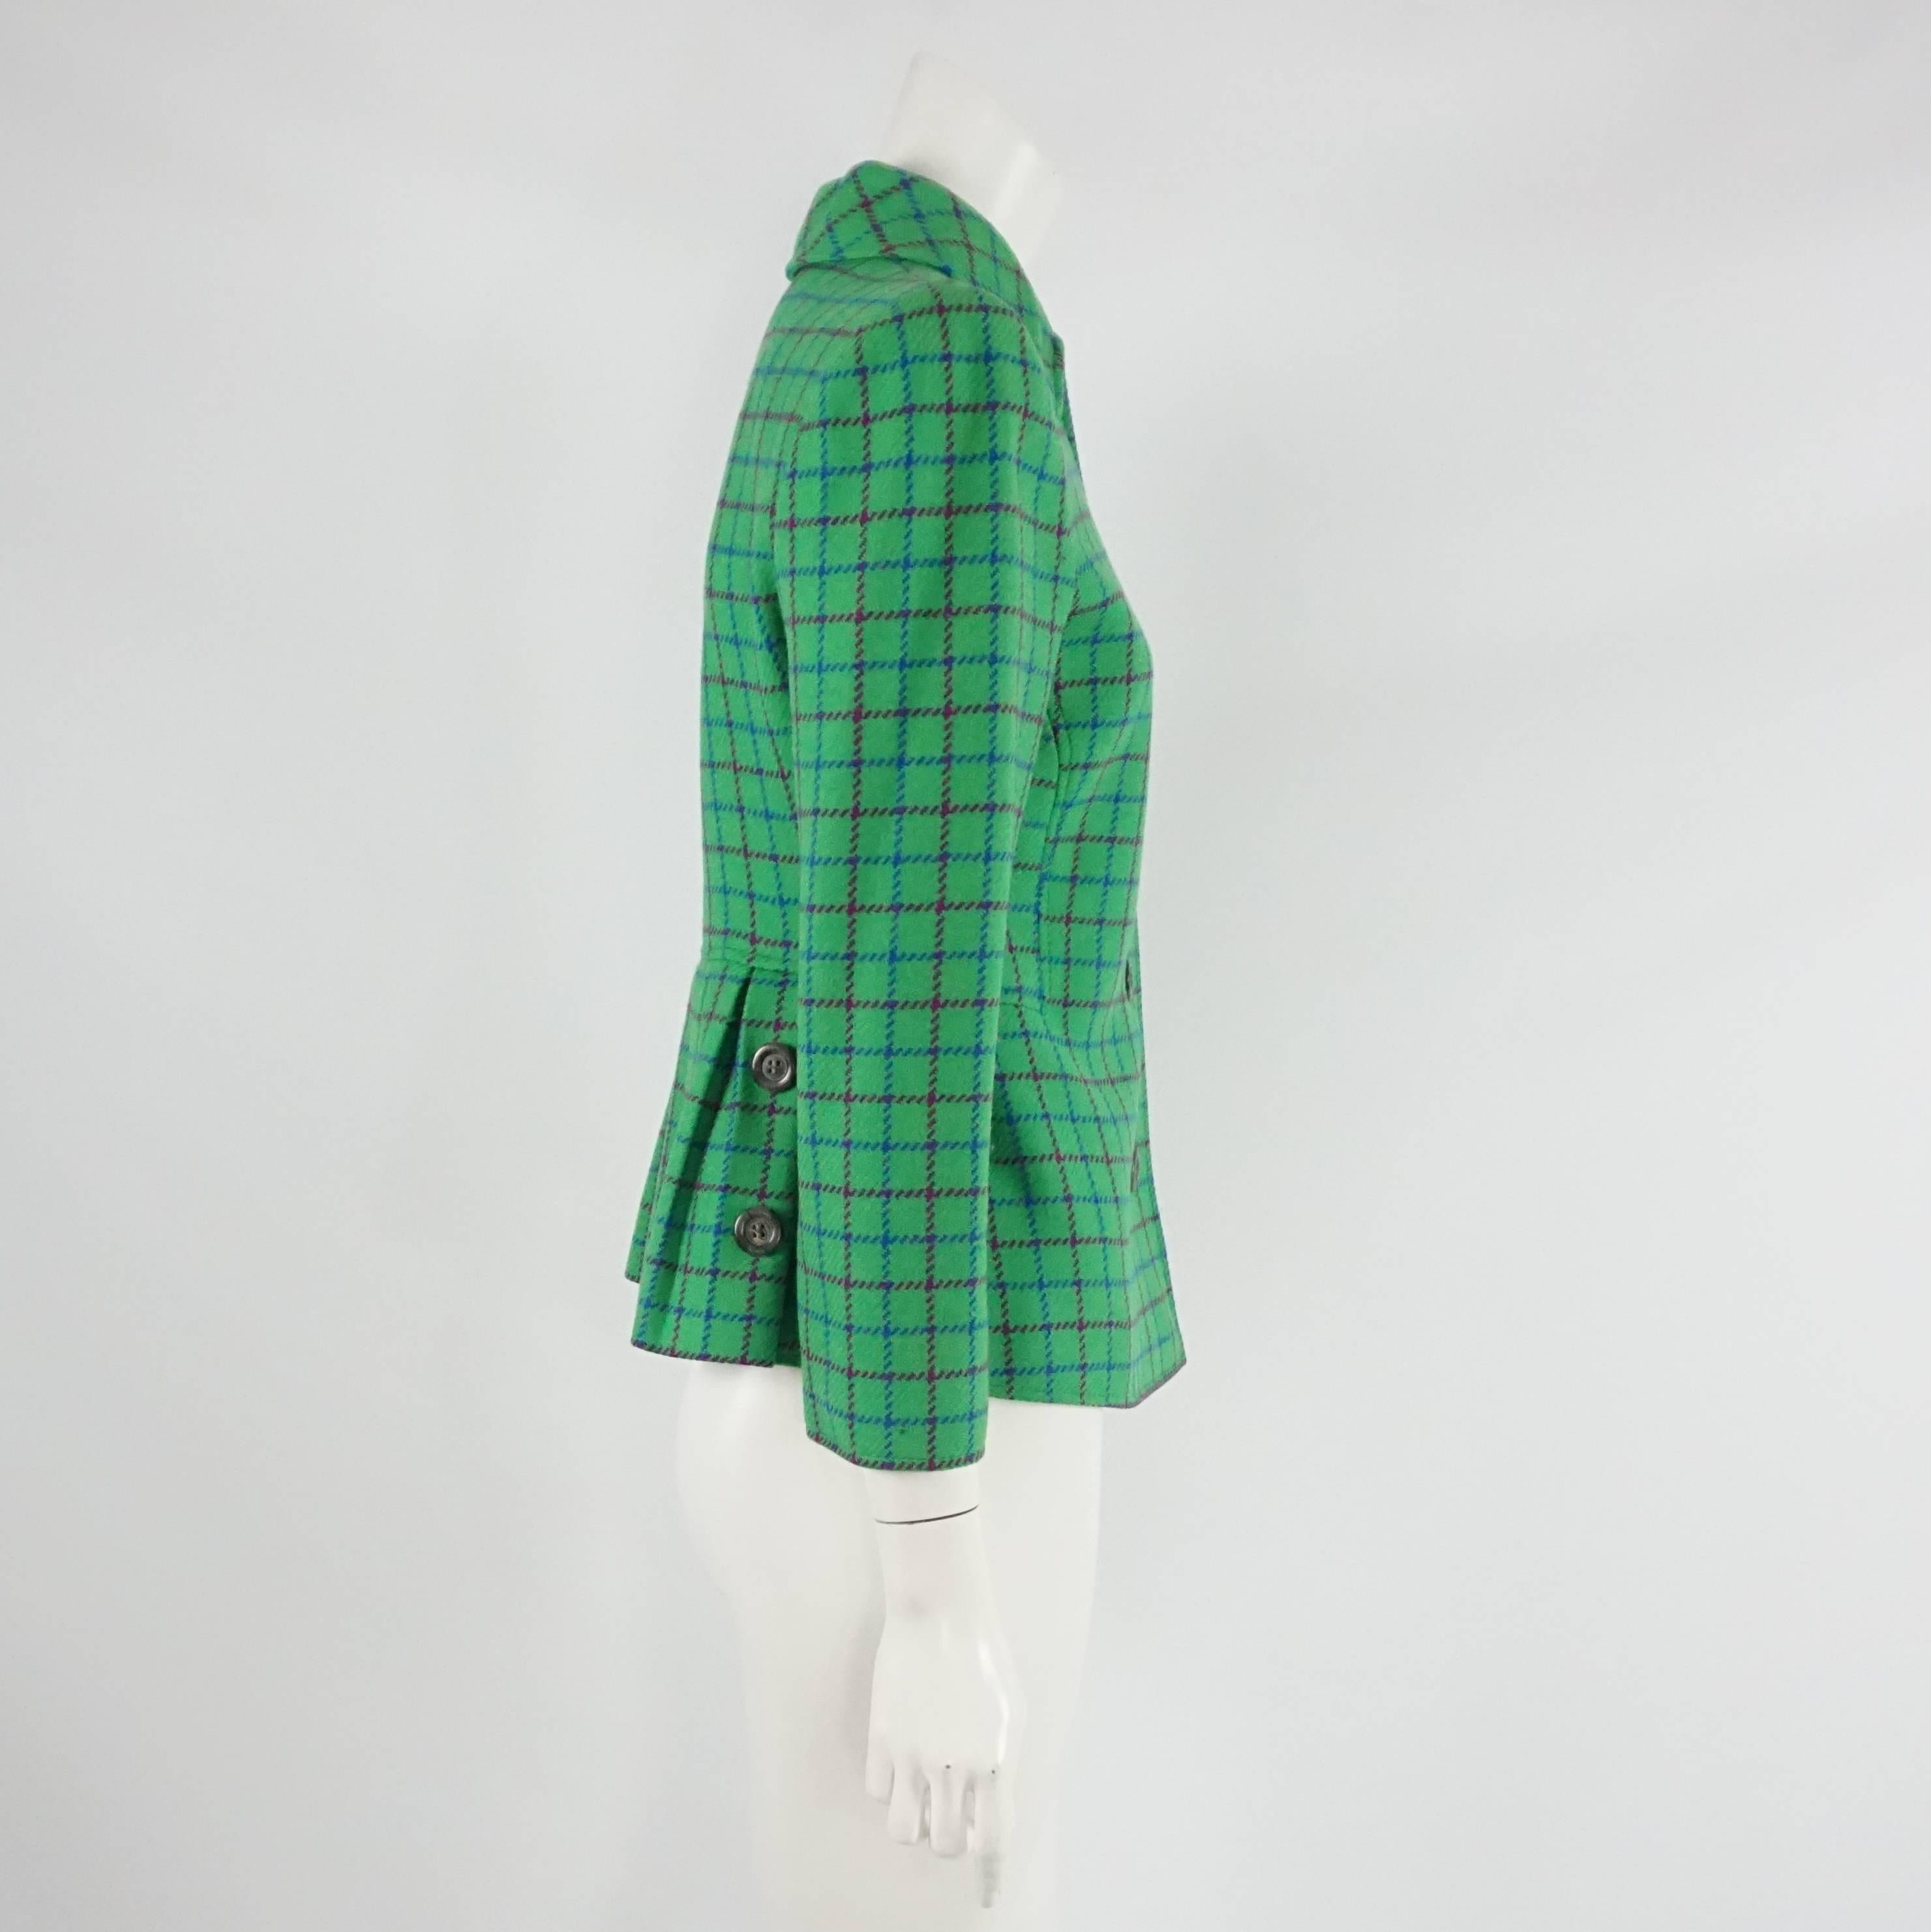 Valentino Green Checkered Wool Jacket - Size 8 - Circa 80's  This spectacular kelly green wool jacket has a blue and wine color chekered detail to the fabric. It is single breasted with 5 buttons down the front of the jacket, the jacket is fitted